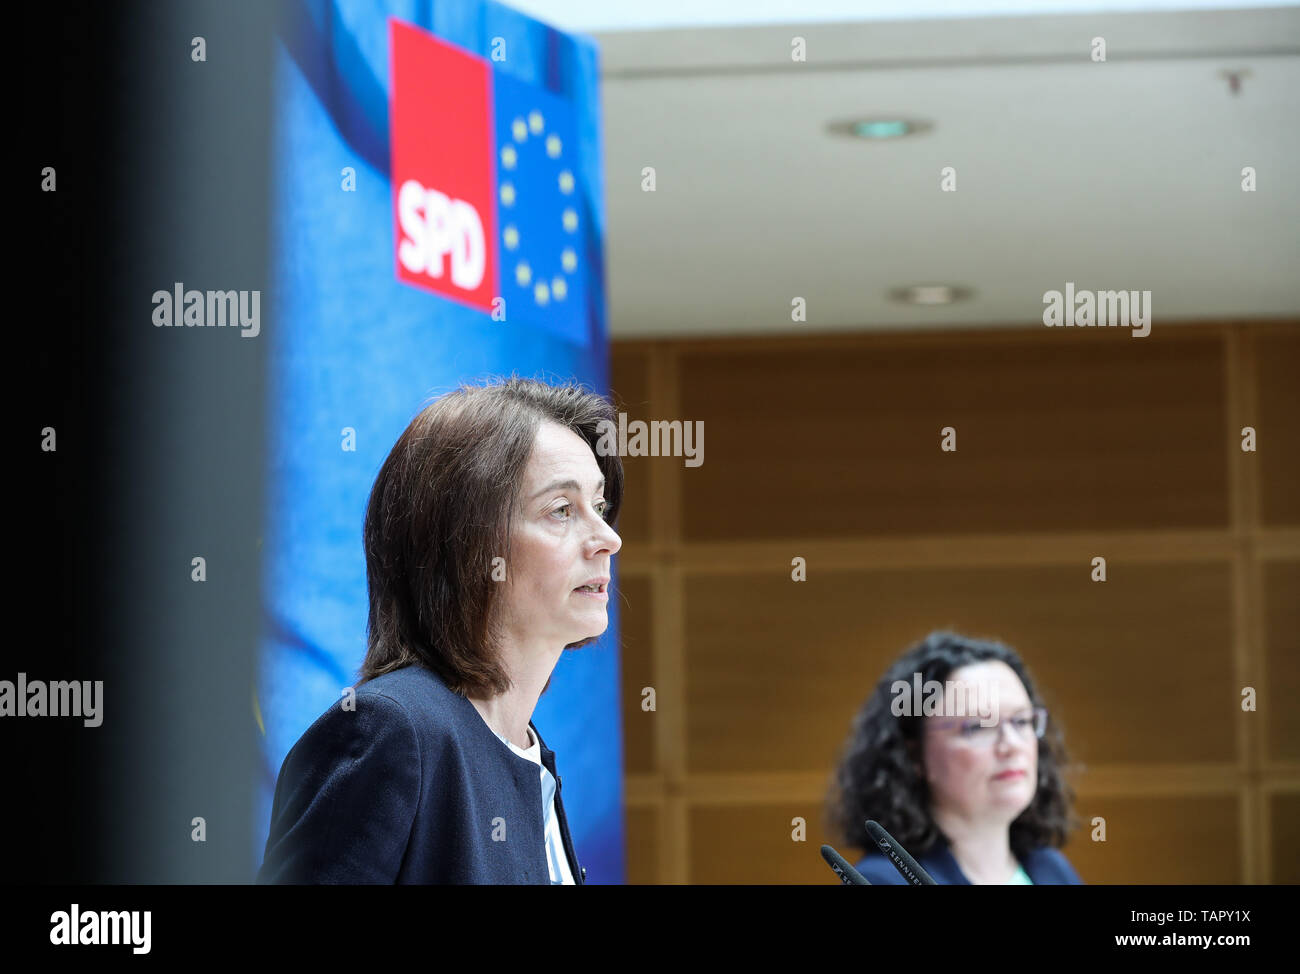 Berlin, Germany. 27th May, 2019. Katarina Barley (L), German Justice Minister and top candidate of German Social Democratic Party (SPD) in the European parliamentary elections, attends a press conference at the headquarters of SPD in Berlin, capital of Germany, May 27, 2019. The German governing coalition parties, the Social Democrats (SPD) and the conservative union CDU/CSU, suffered significant losses in the European elections, according to the official results published by the European Parliament on Monday. Credit: Dan Yuqi/Xinhua/Alamy Live News Stock Photo